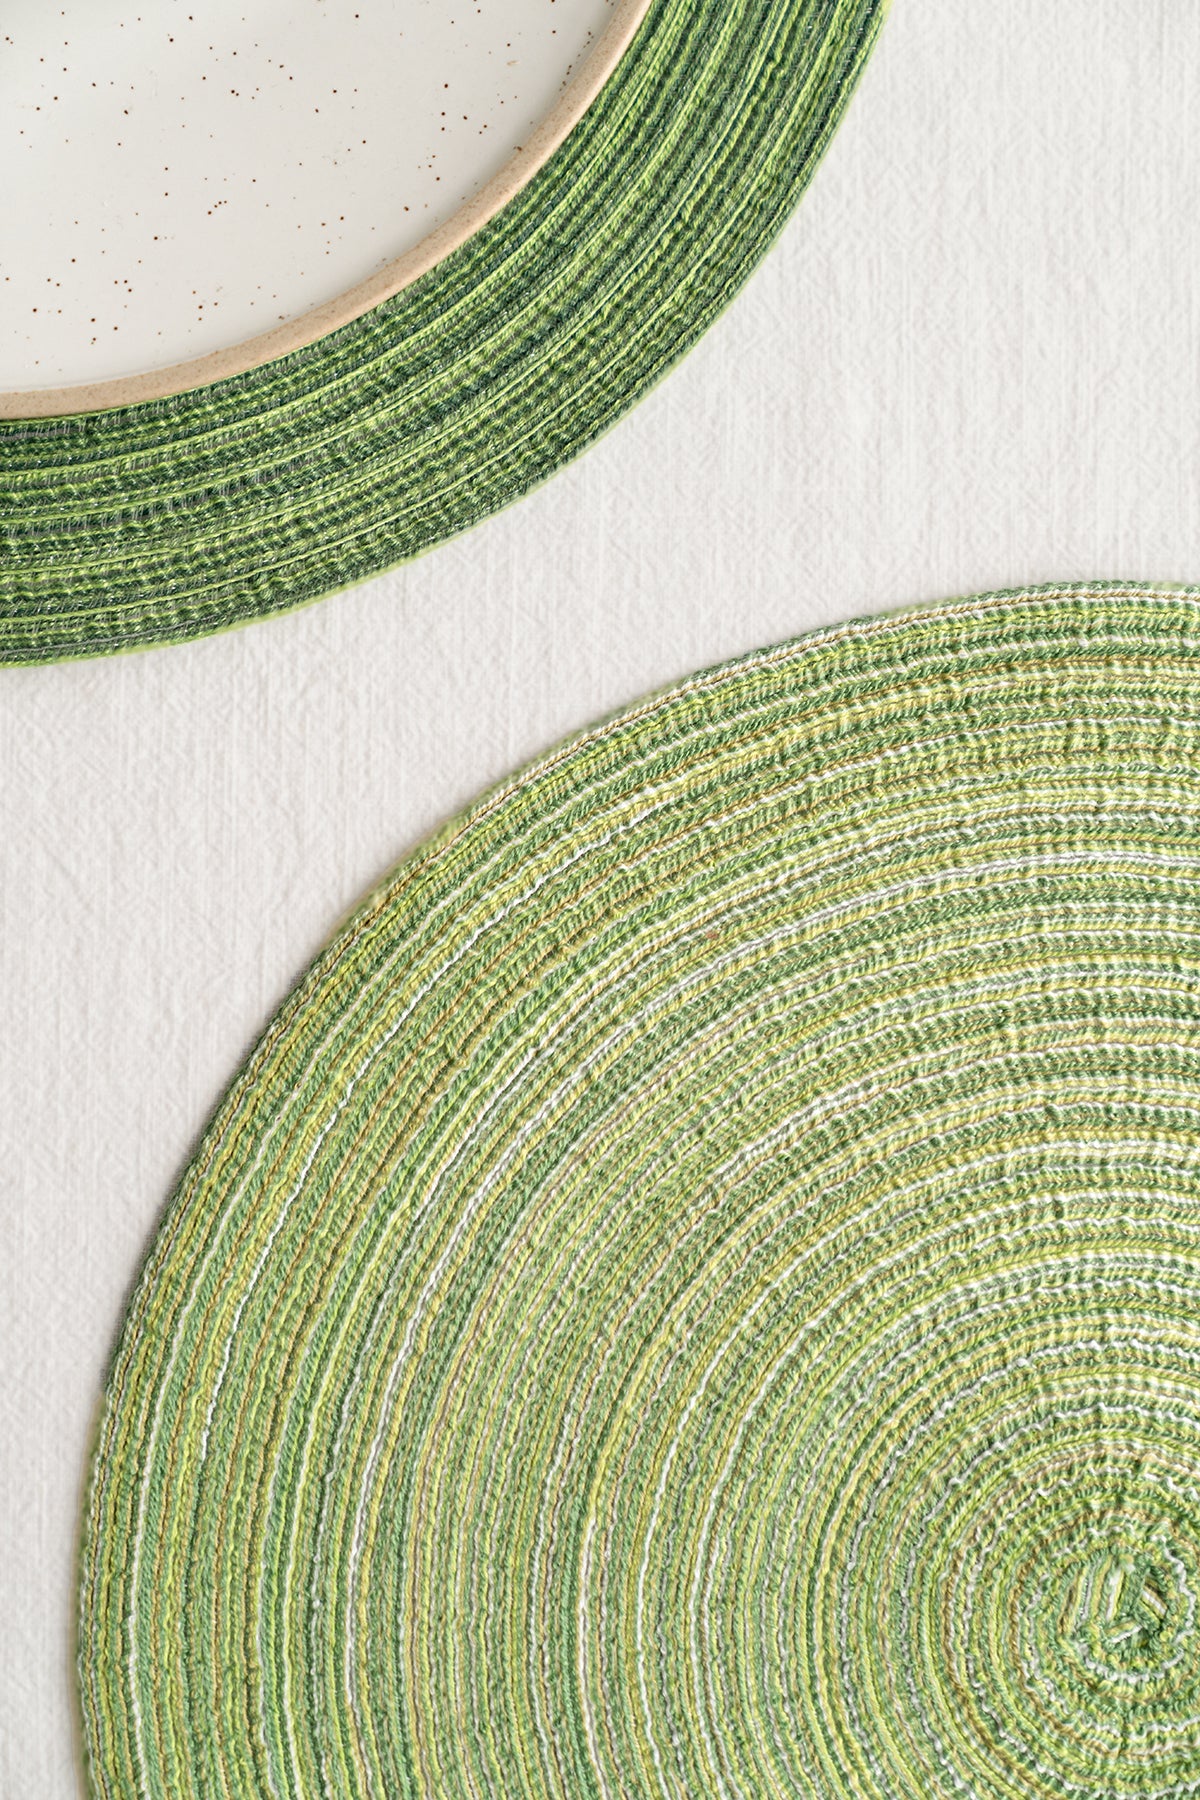 Round Woven Placemats in Sage Green